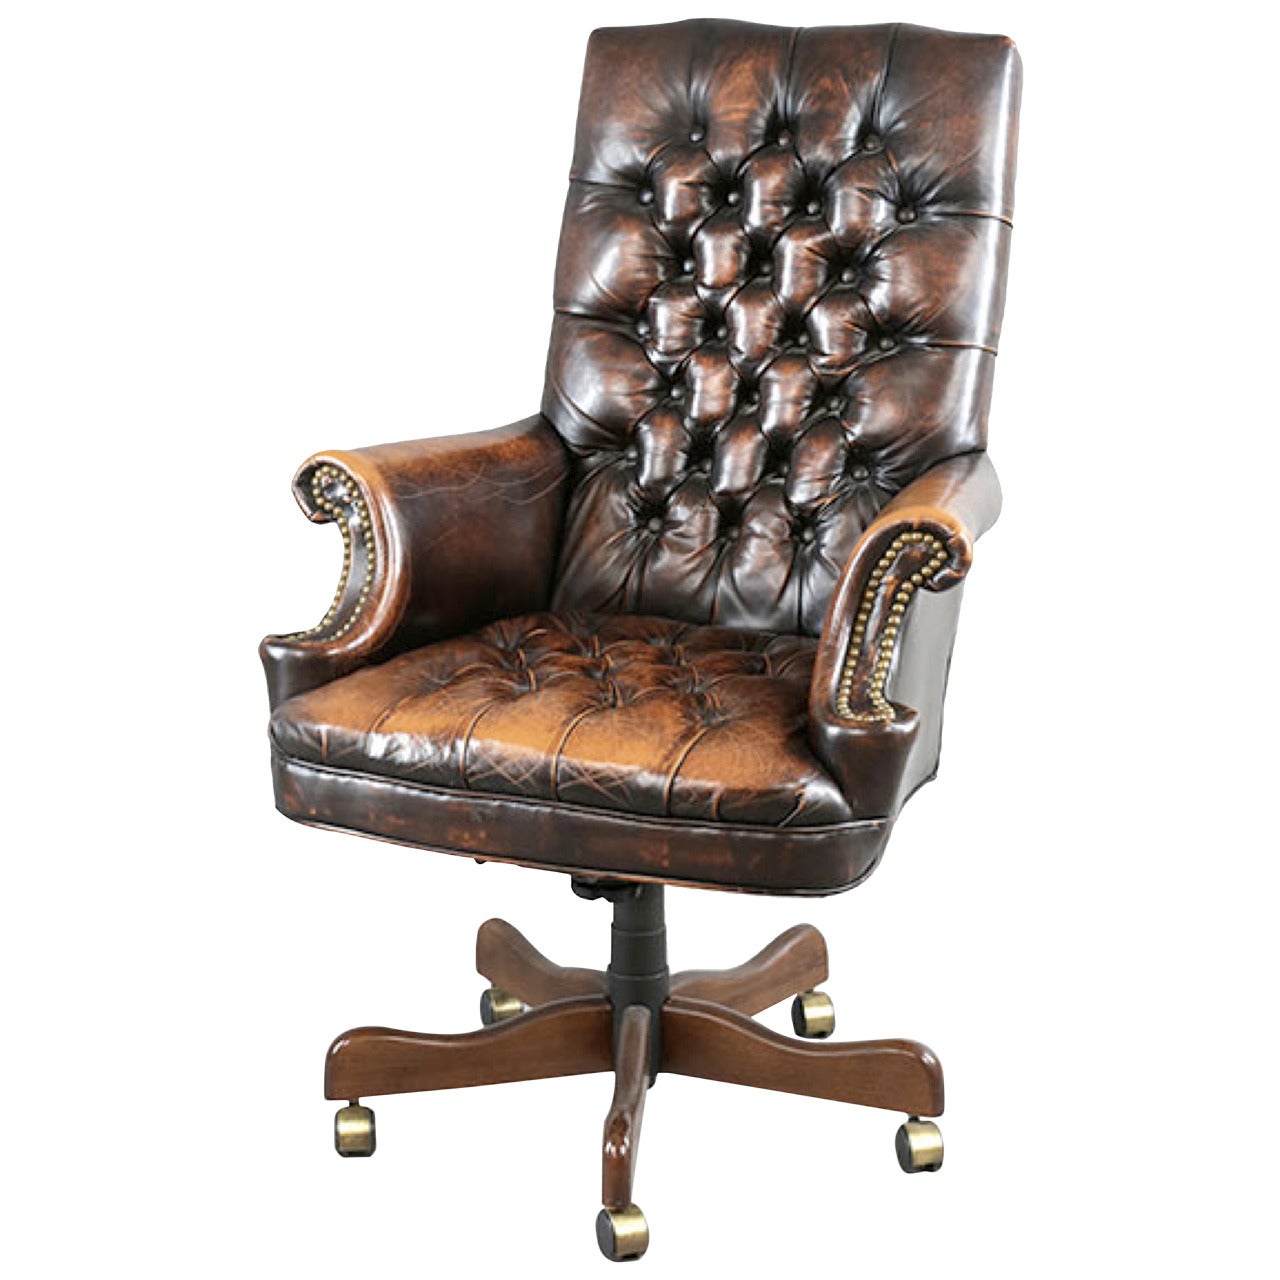 Leather Executive Chair with Worn Patina